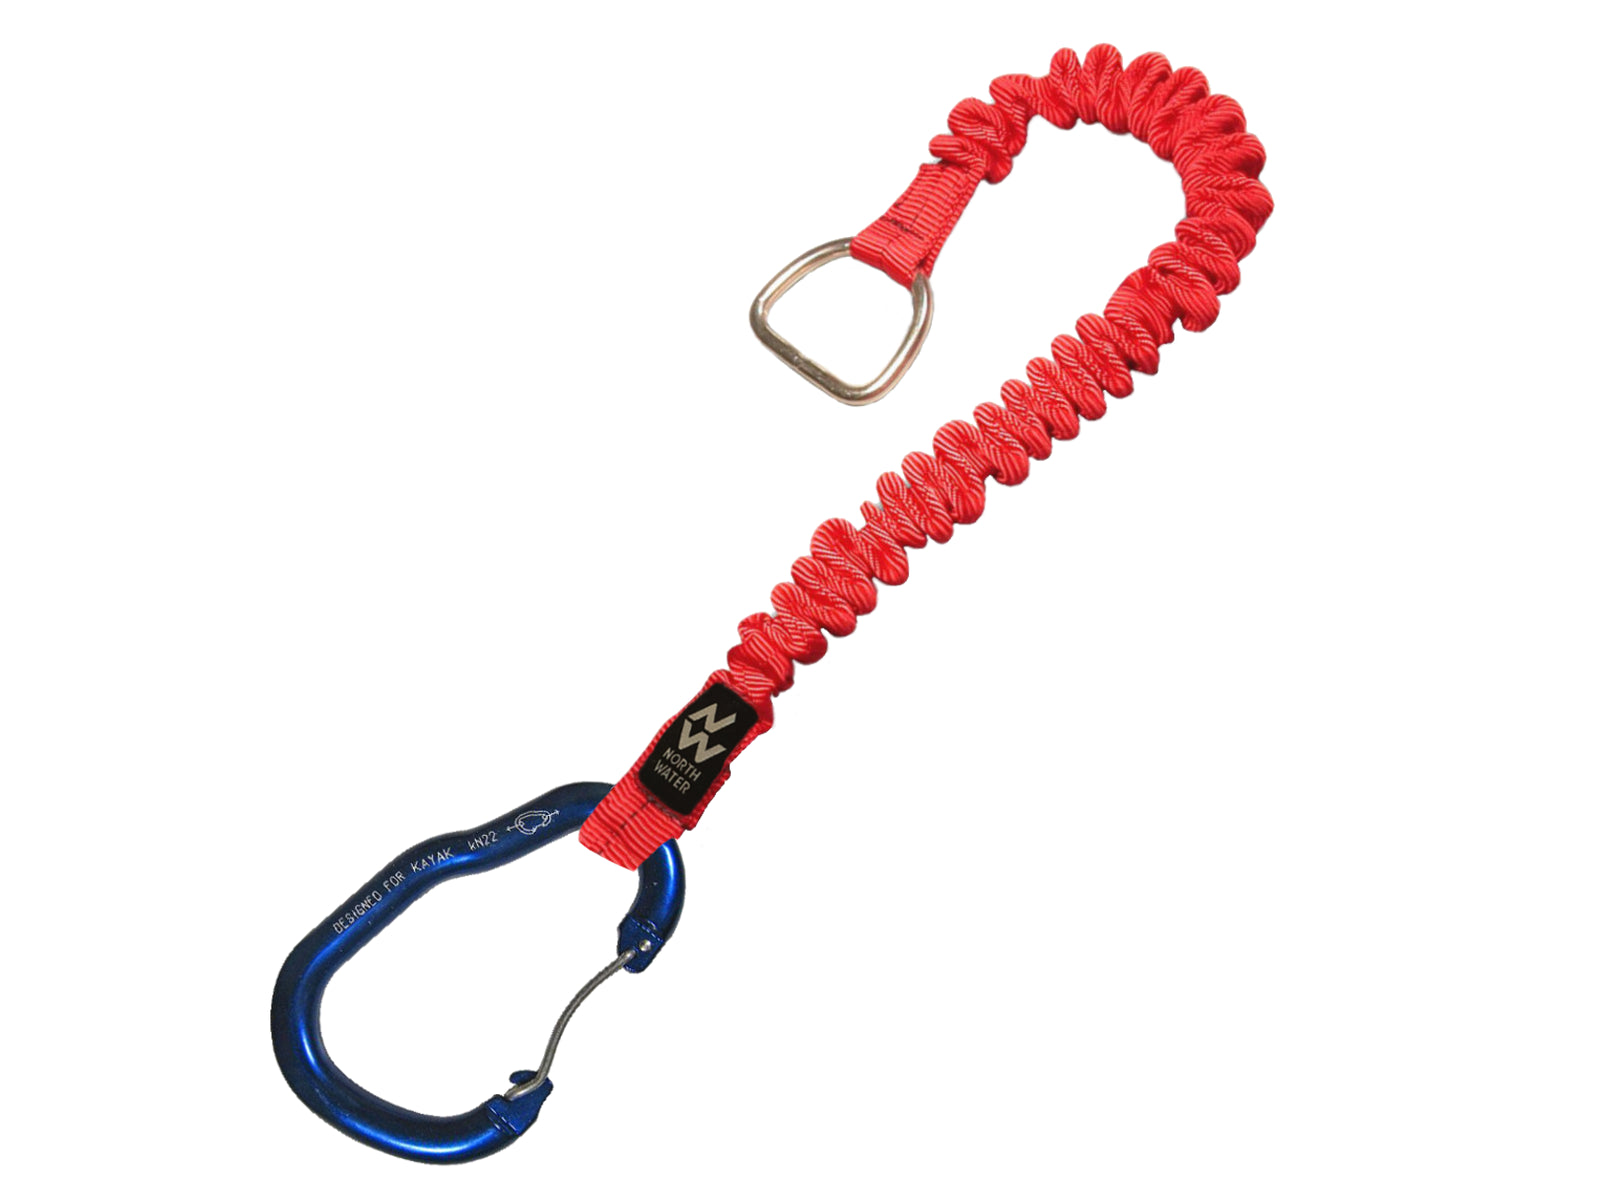 North Water PFD Pig Tail with Paddle Carabiner - Olympic Outdoor